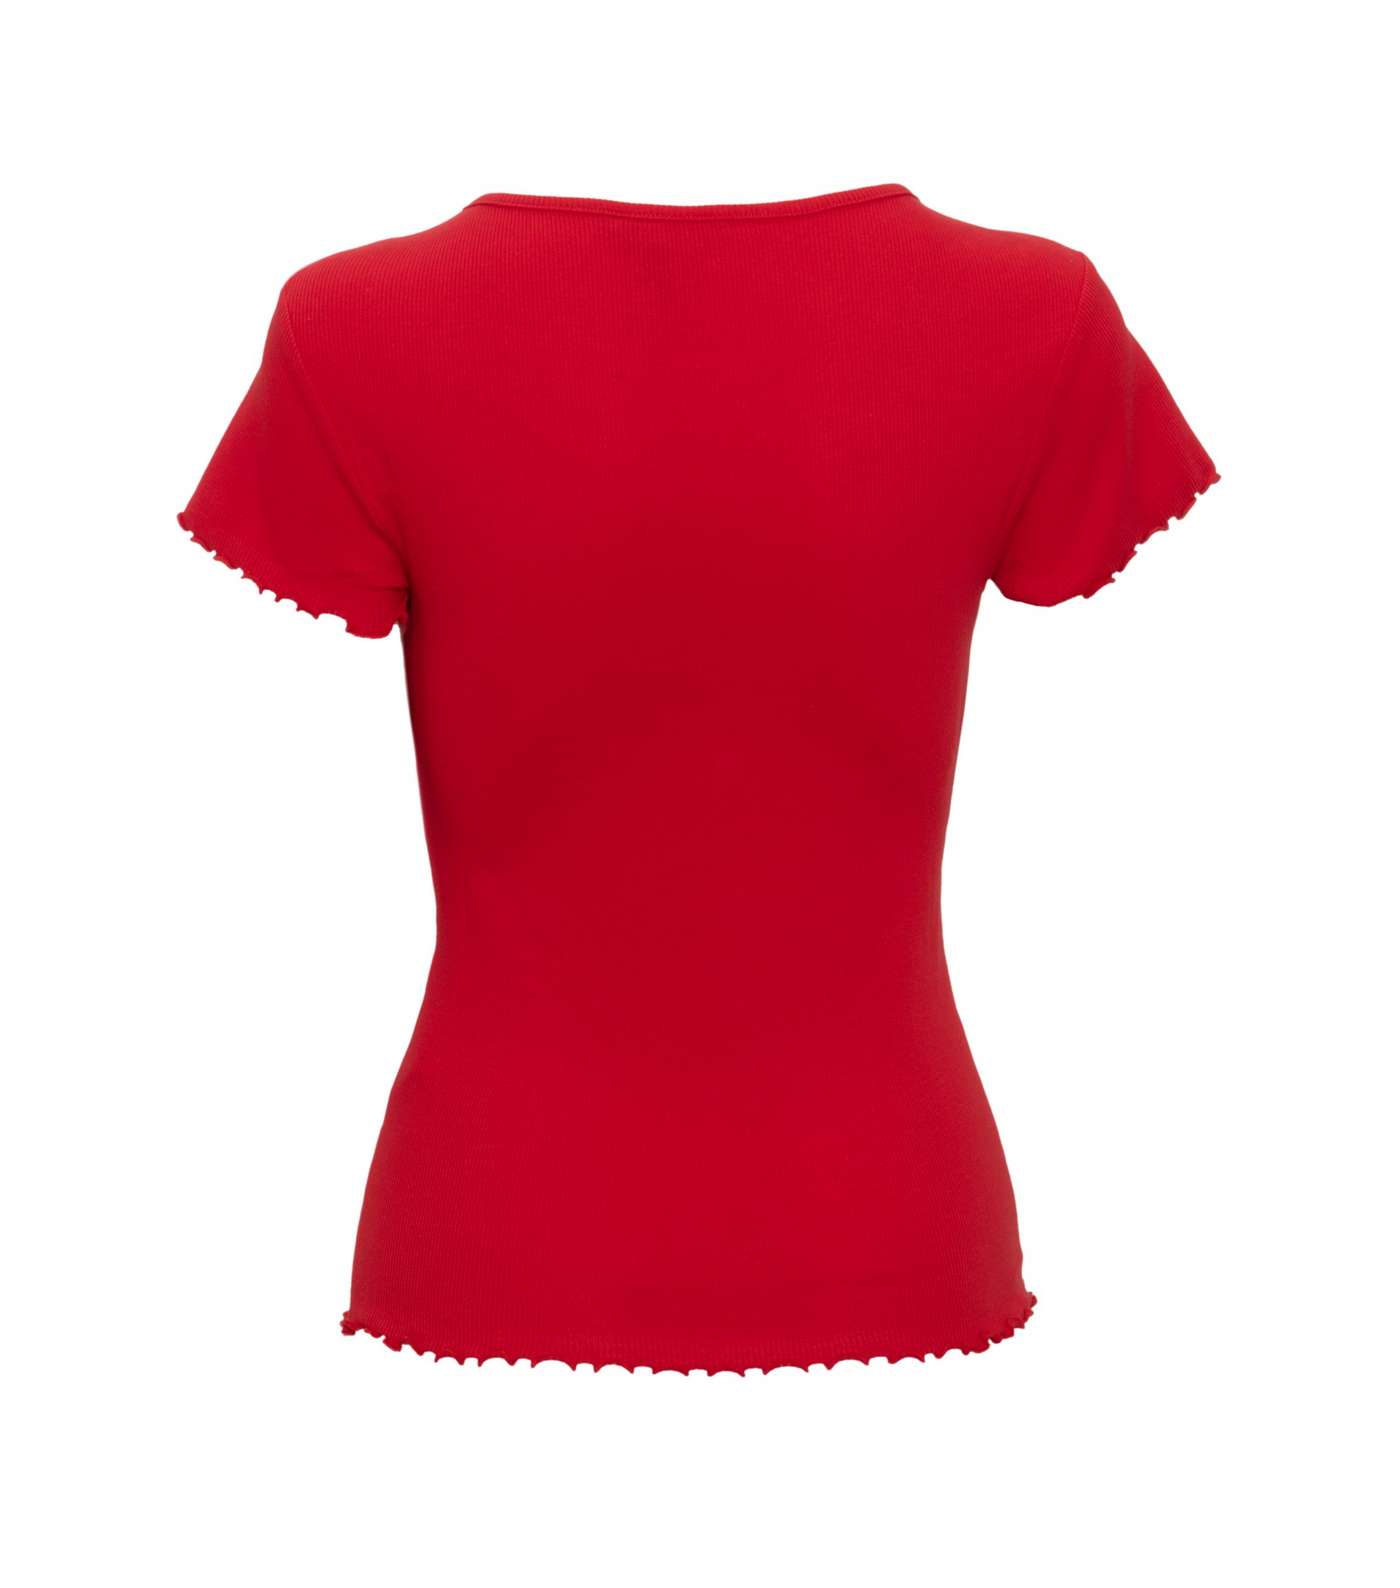 Red Frill Trim Cap Sleeve T-Shirt Image 2